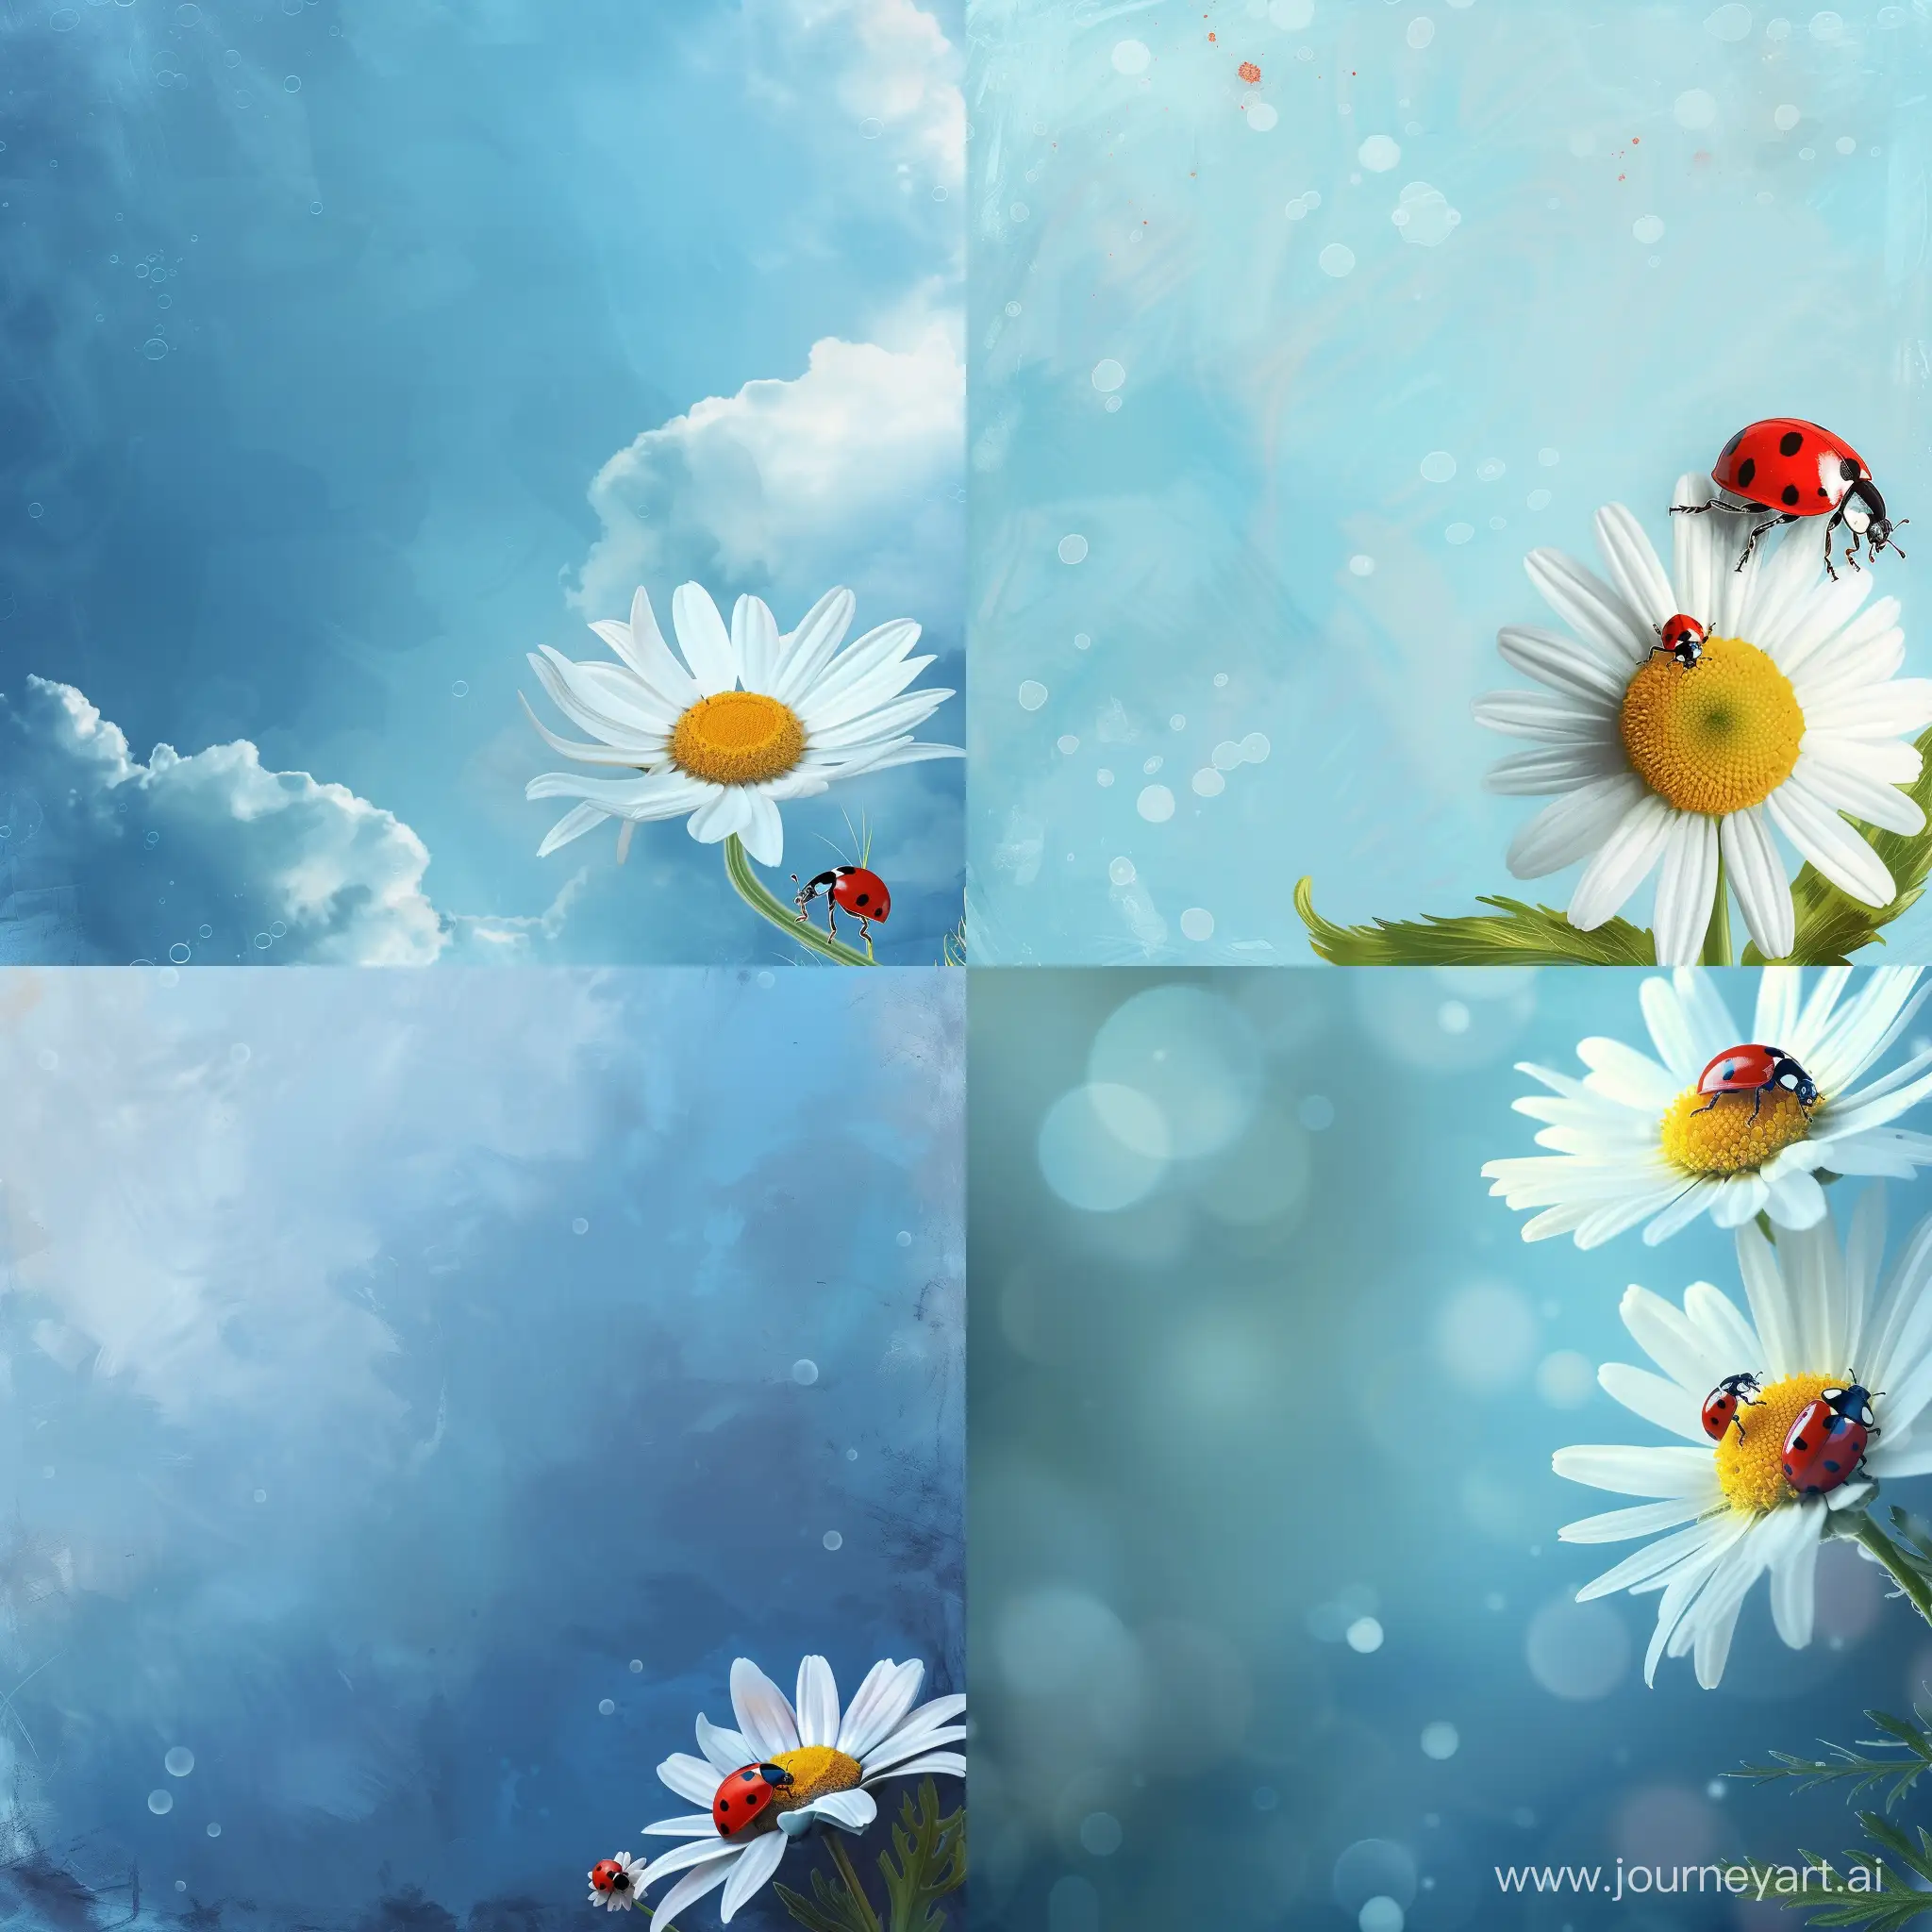 Tranquil-Blue-Sky-with-Daisy-and-Ladybug